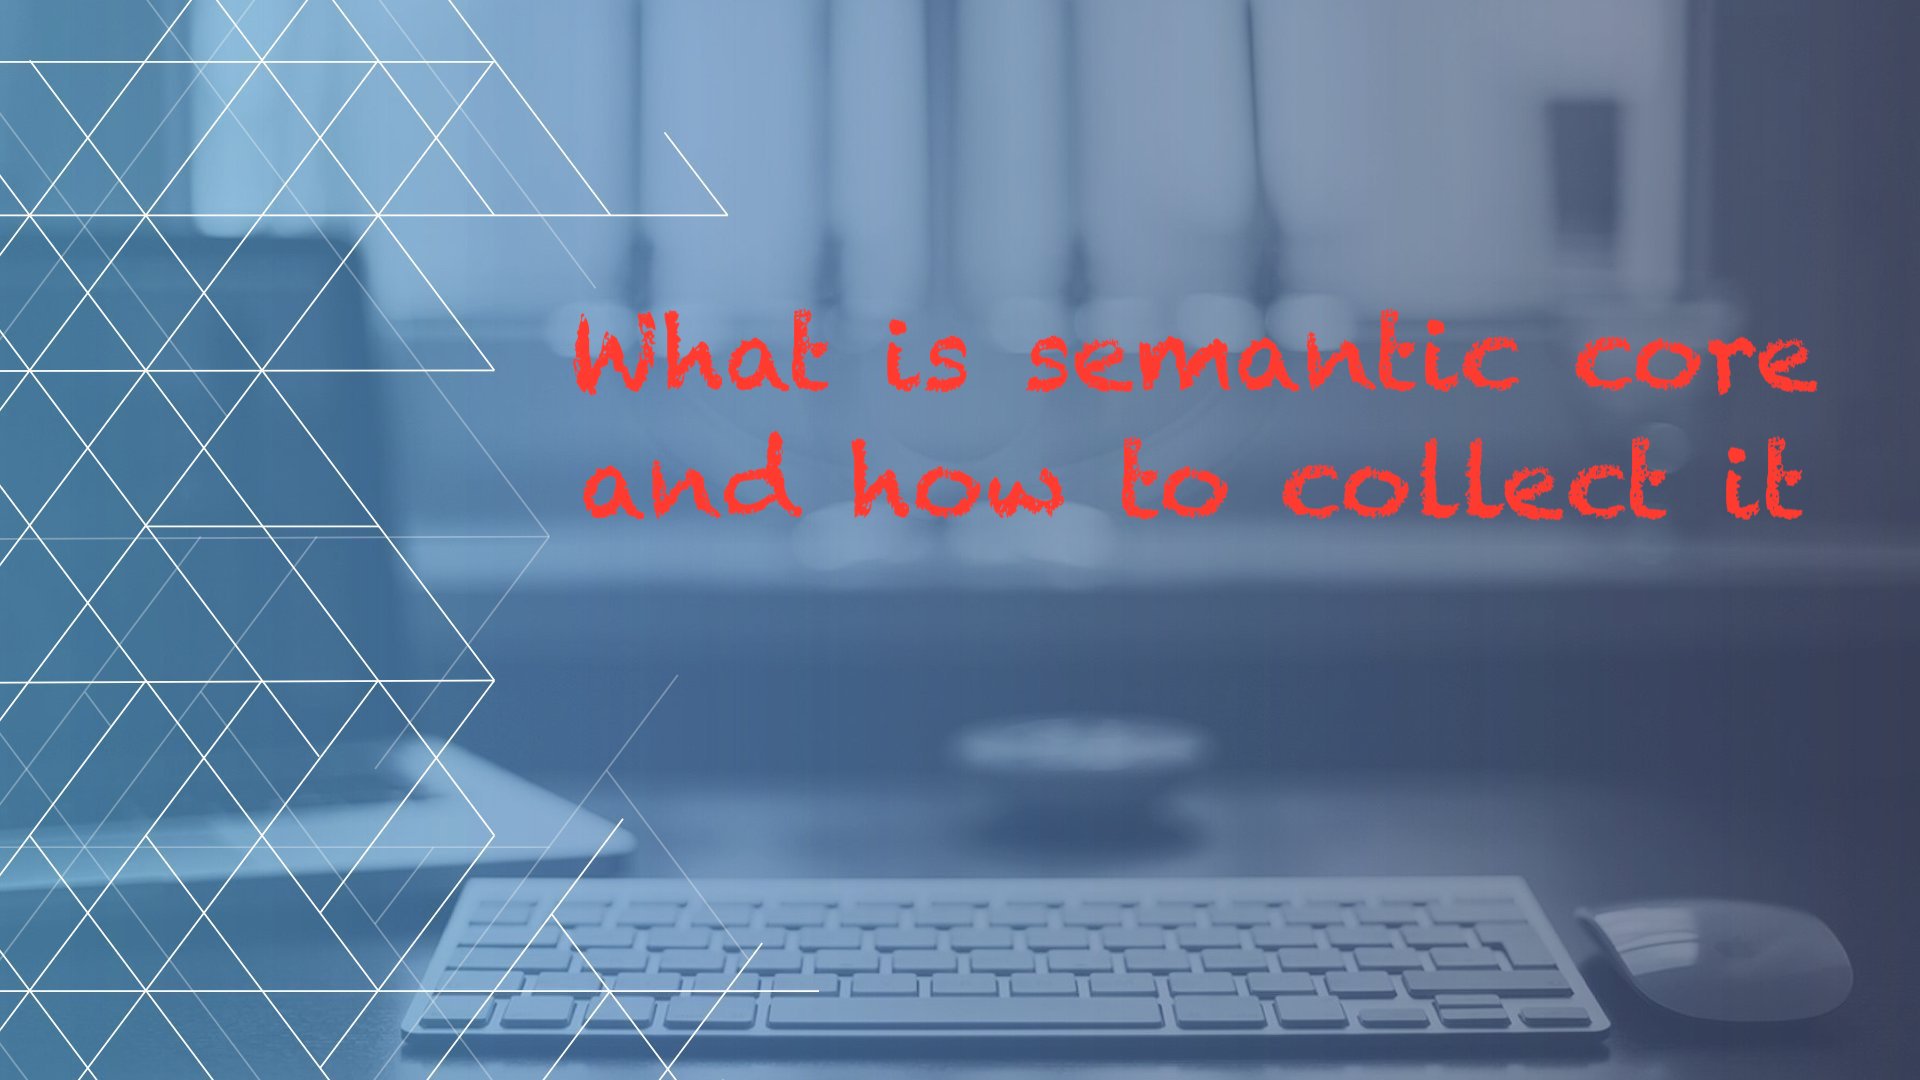 What is the semantic core and how to collect it